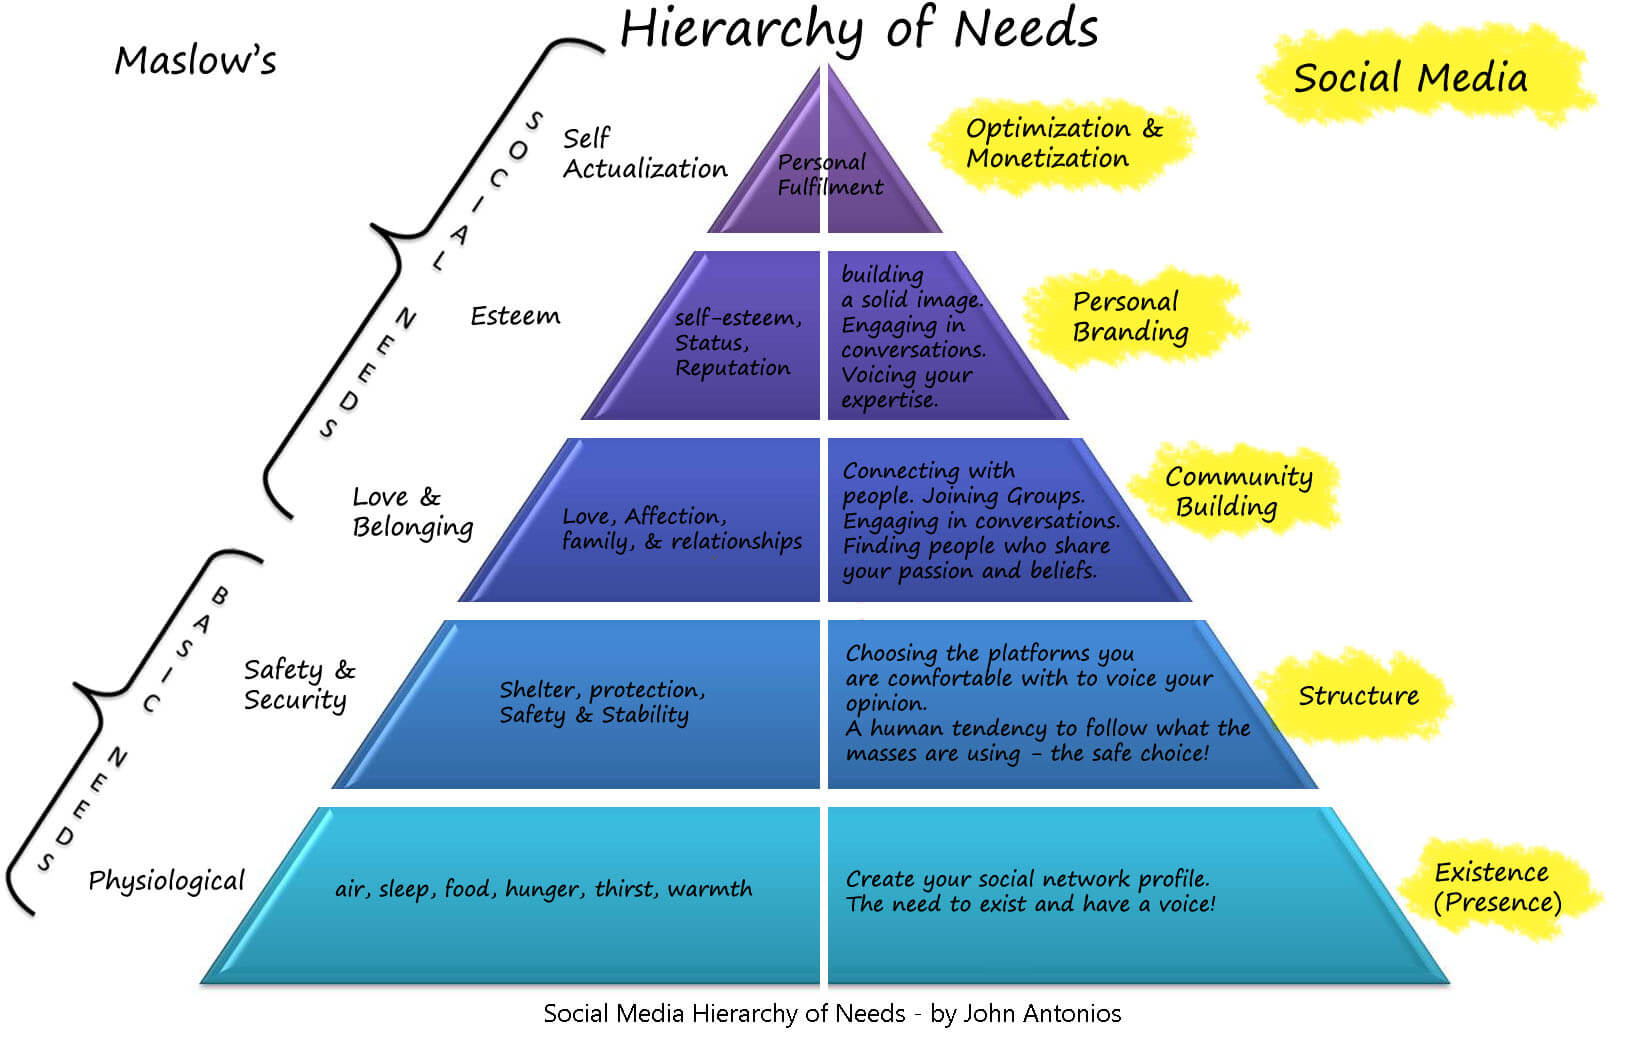 What Is Maslows Theory Of Hierarchy Of Needs Social Media From The